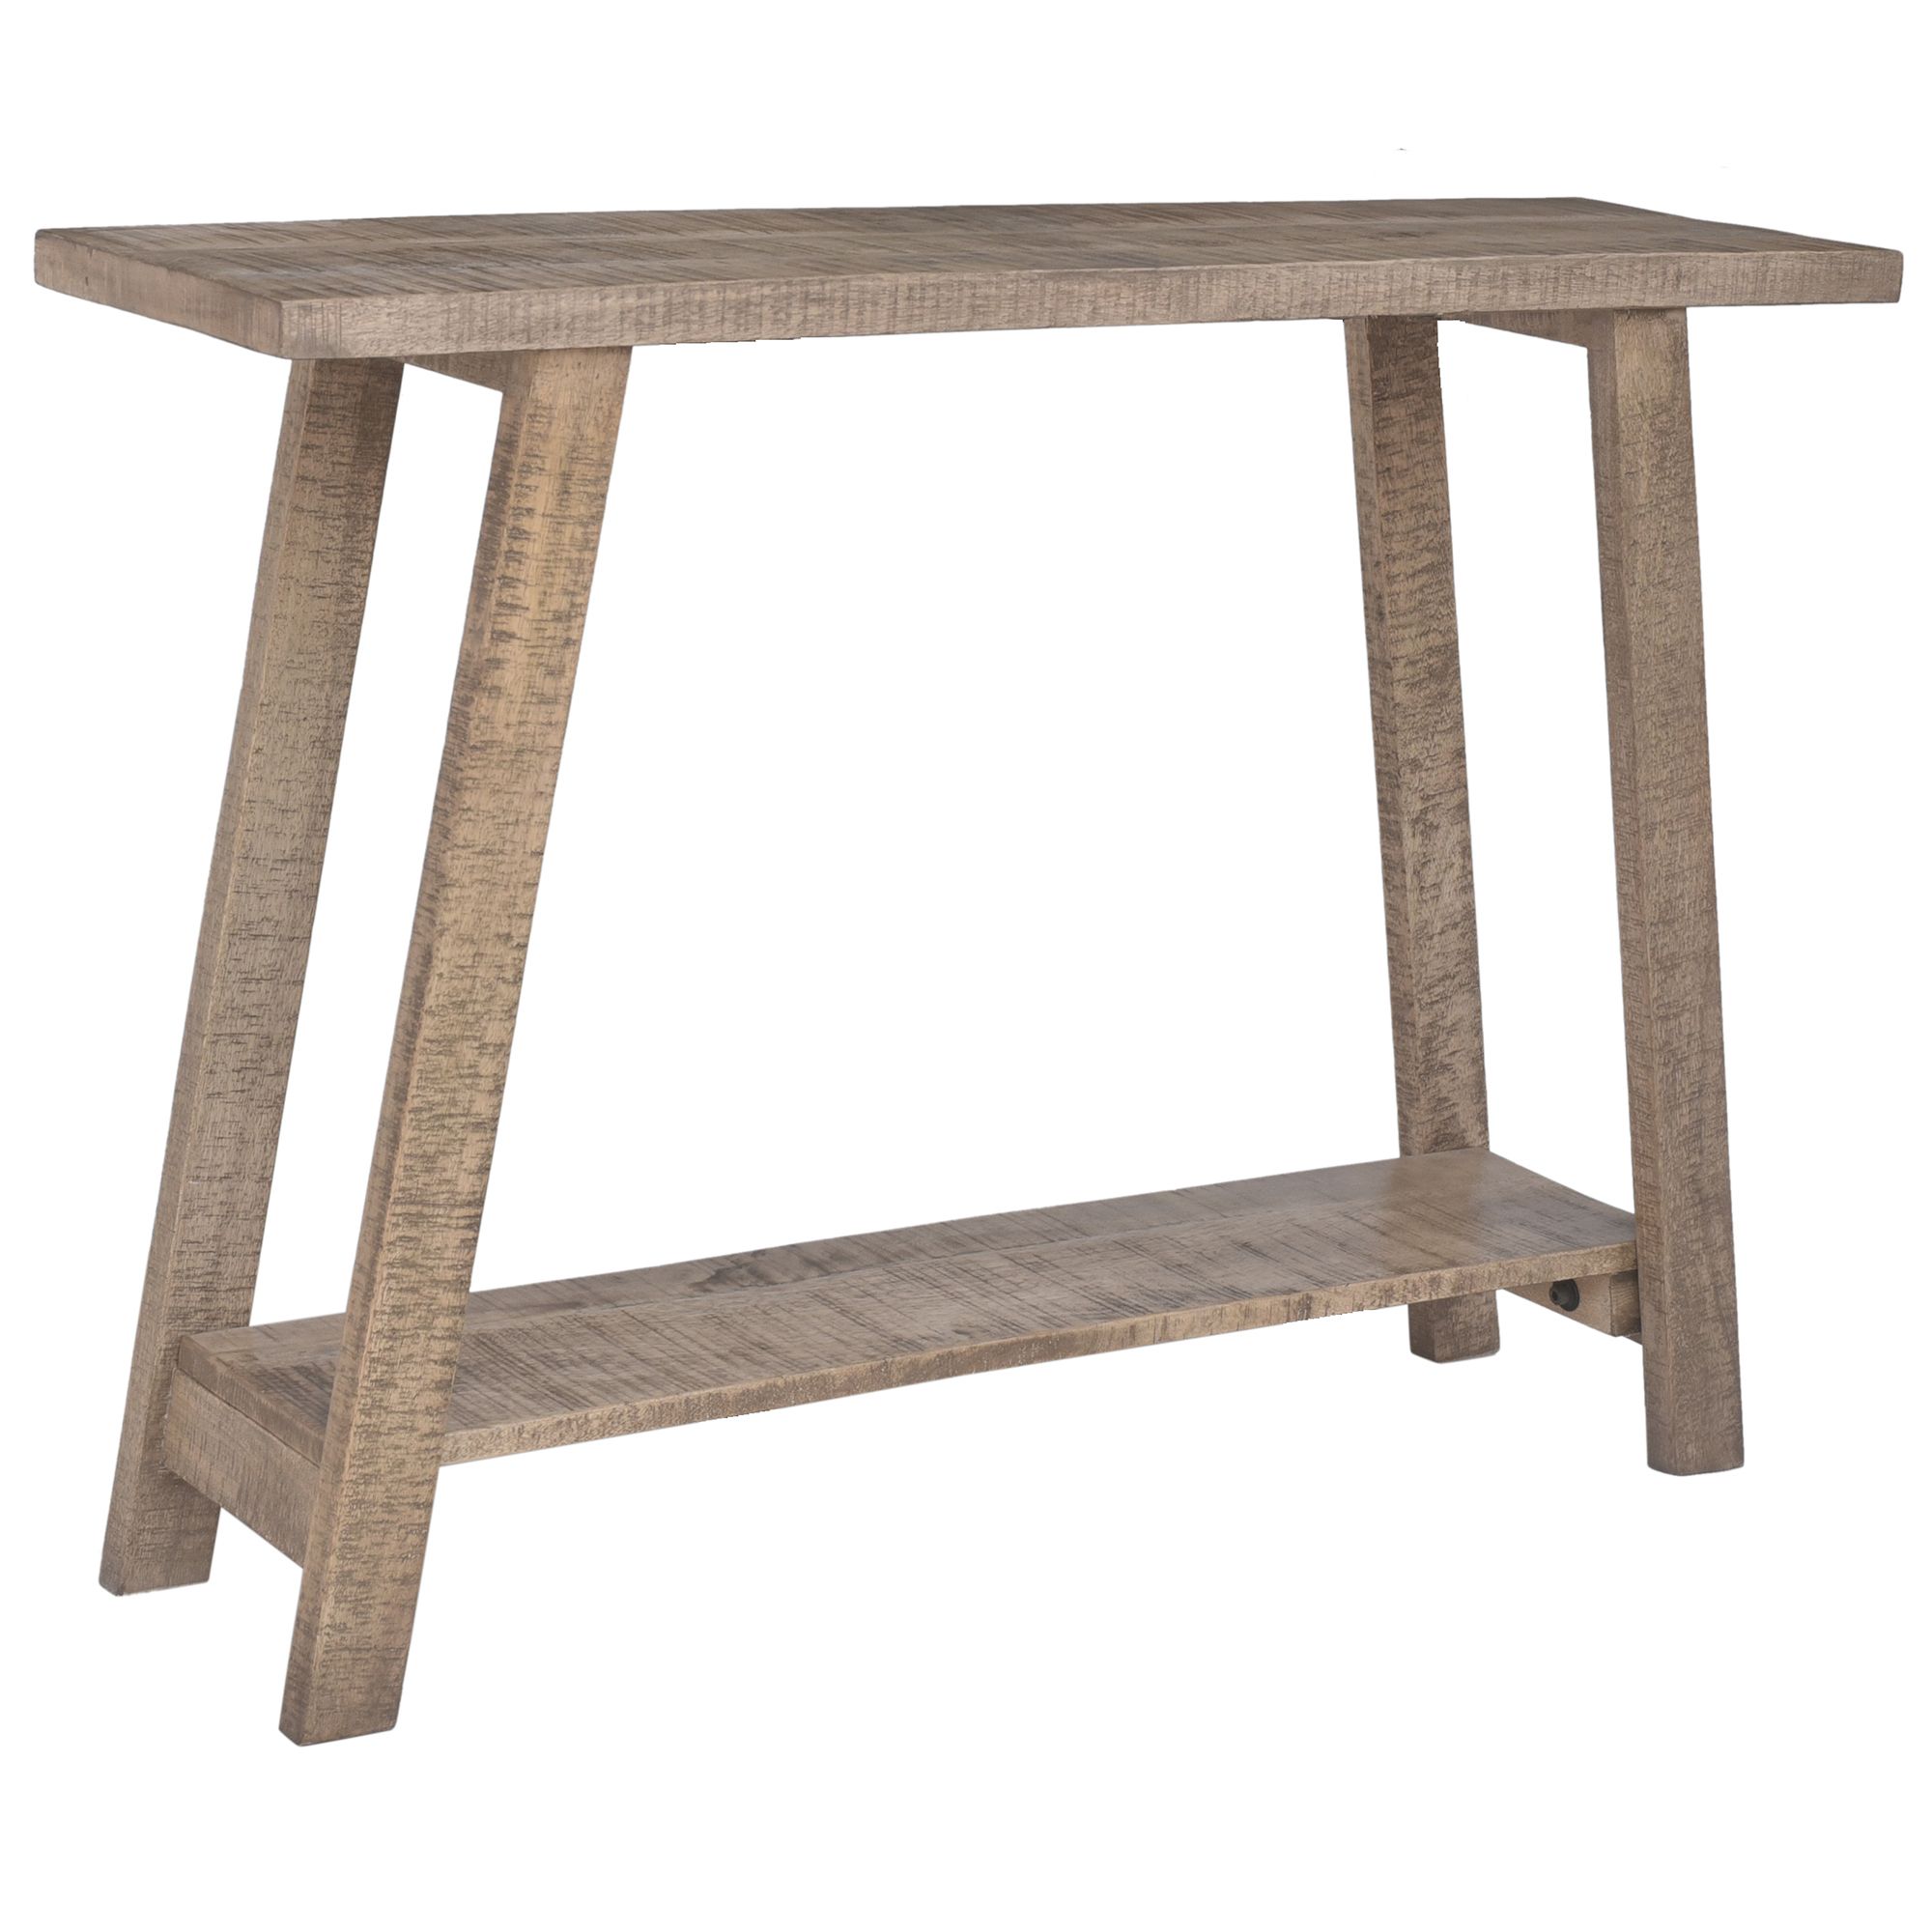 Rustic Modern Solid Wood Console Table – Walmart – Walmart Throughout Modern Console Tables (View 18 of 20)